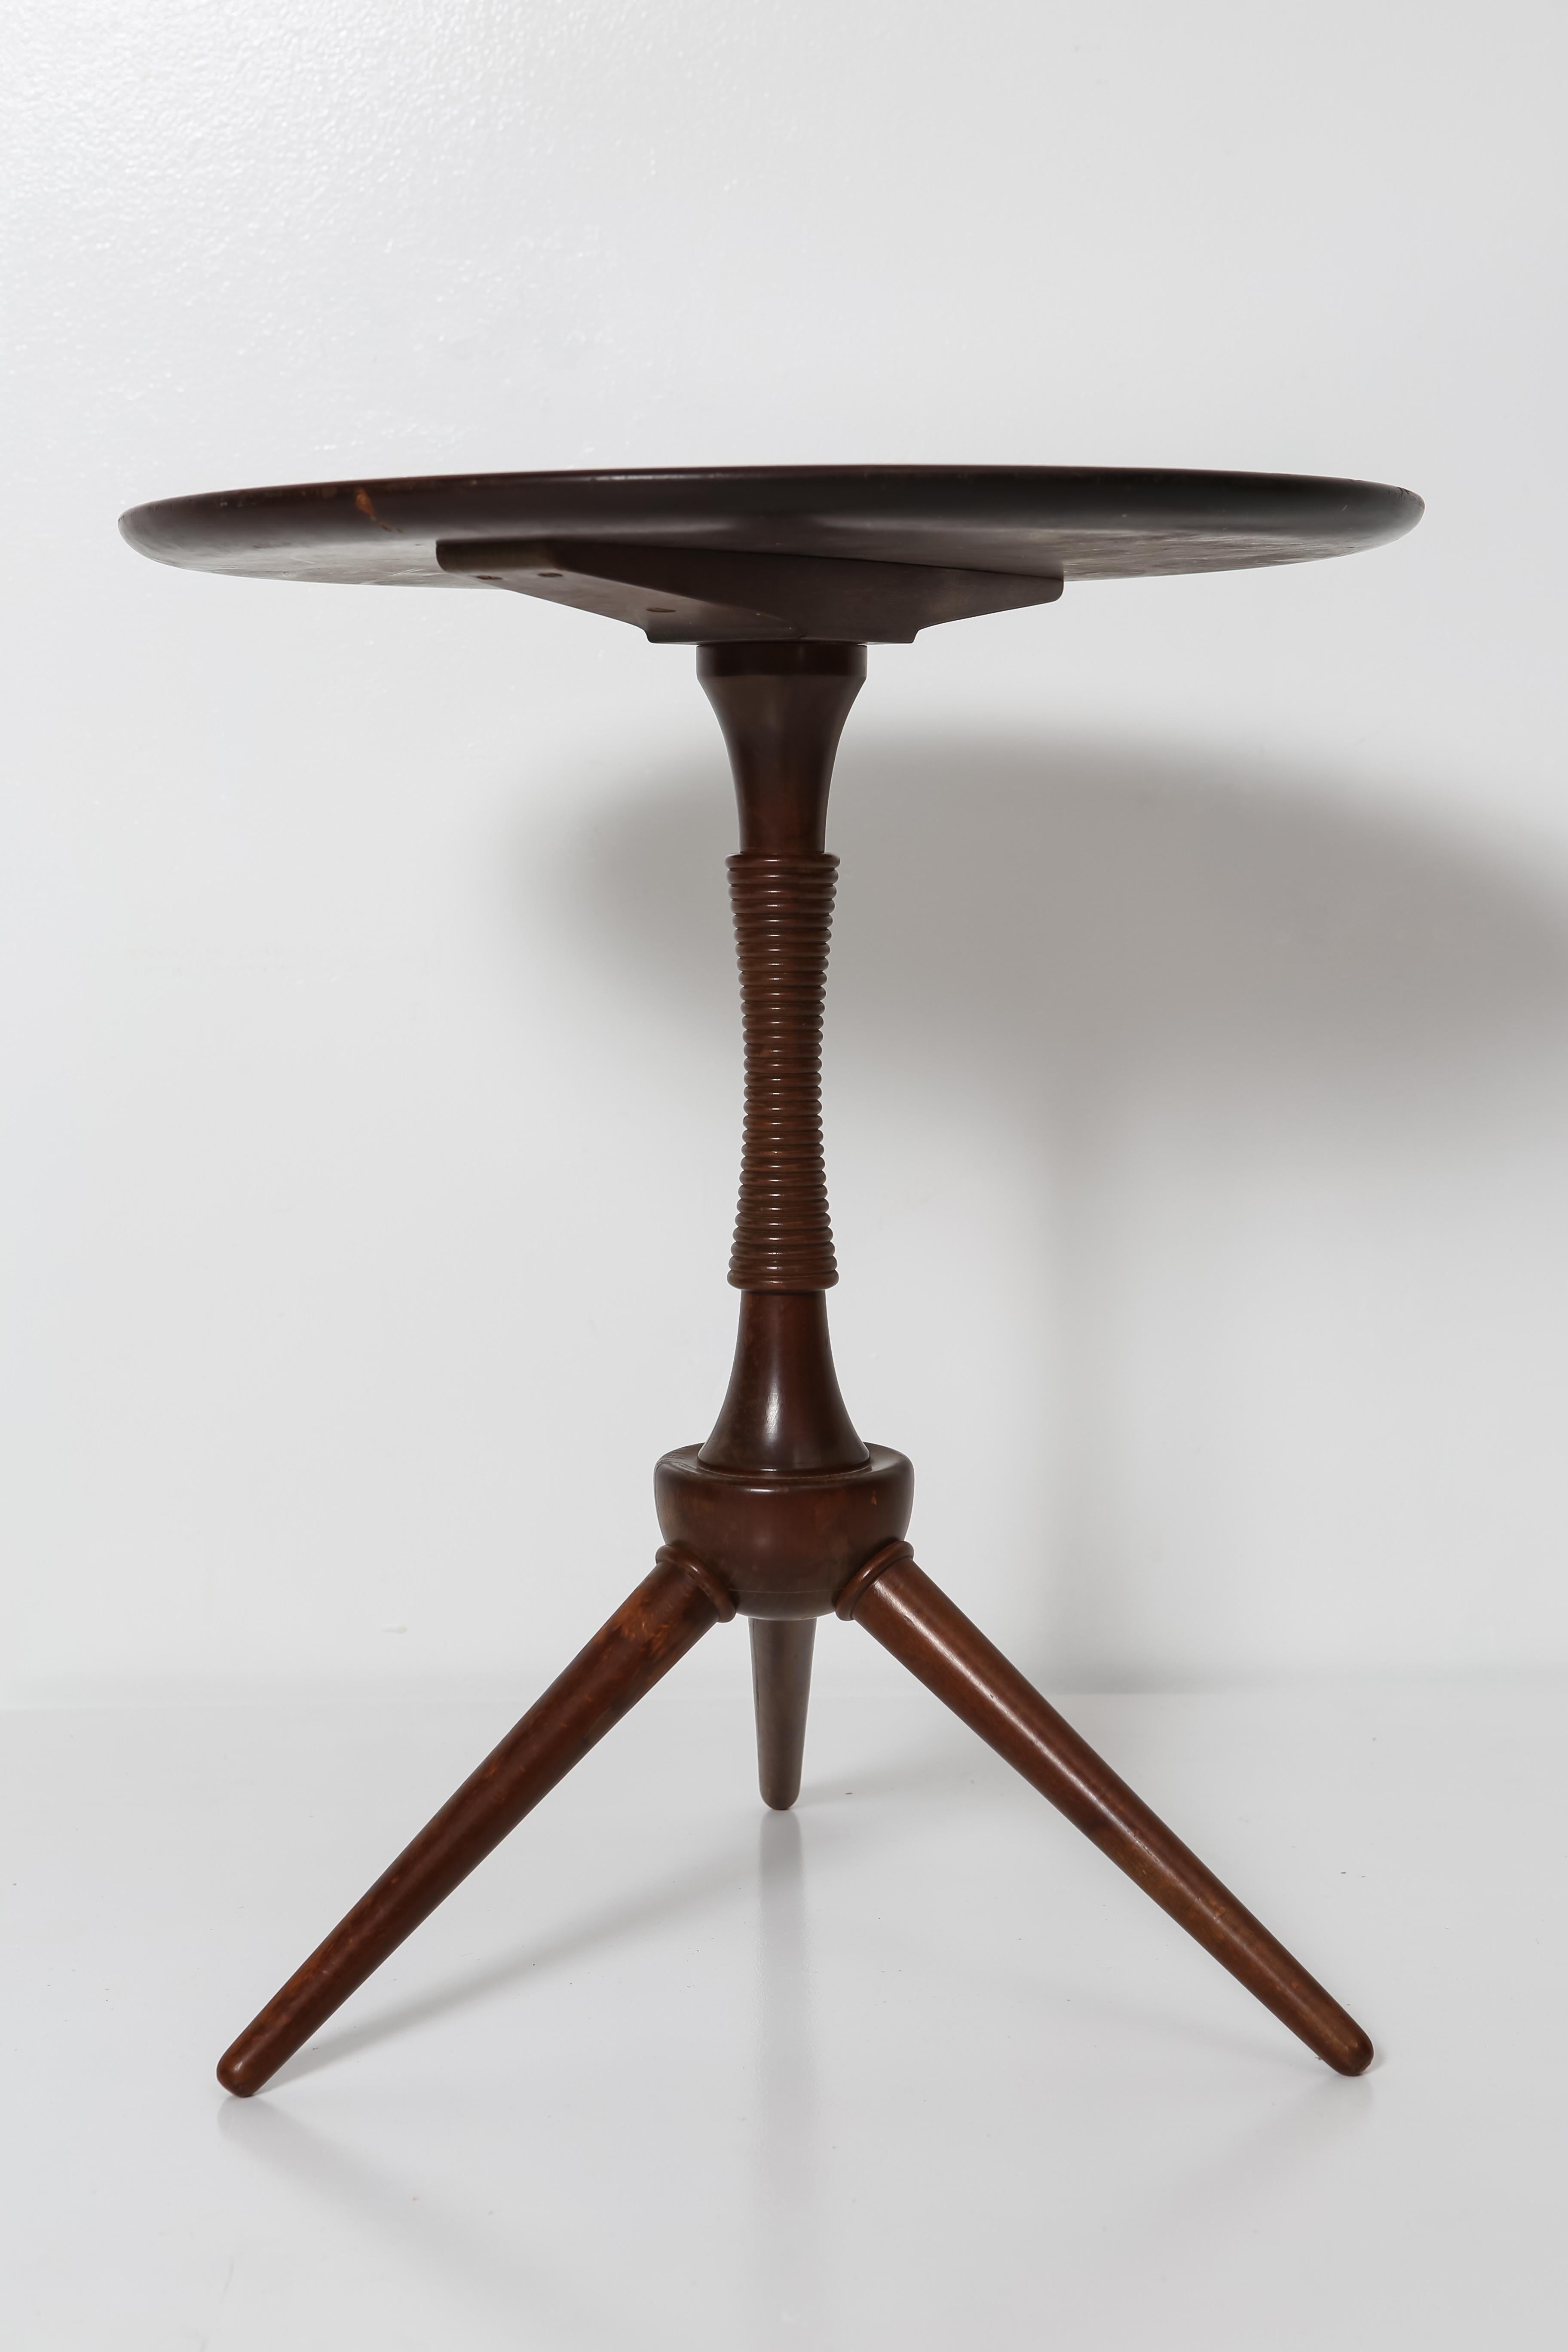 Elegant and charming, this round drink table is an uncommon find. Designed by Frits Henningsen and made in Denmark circa 1930s, it retains its original dark stained beech finish and has wonderful age-appropriate patina. It’s the perfect little side